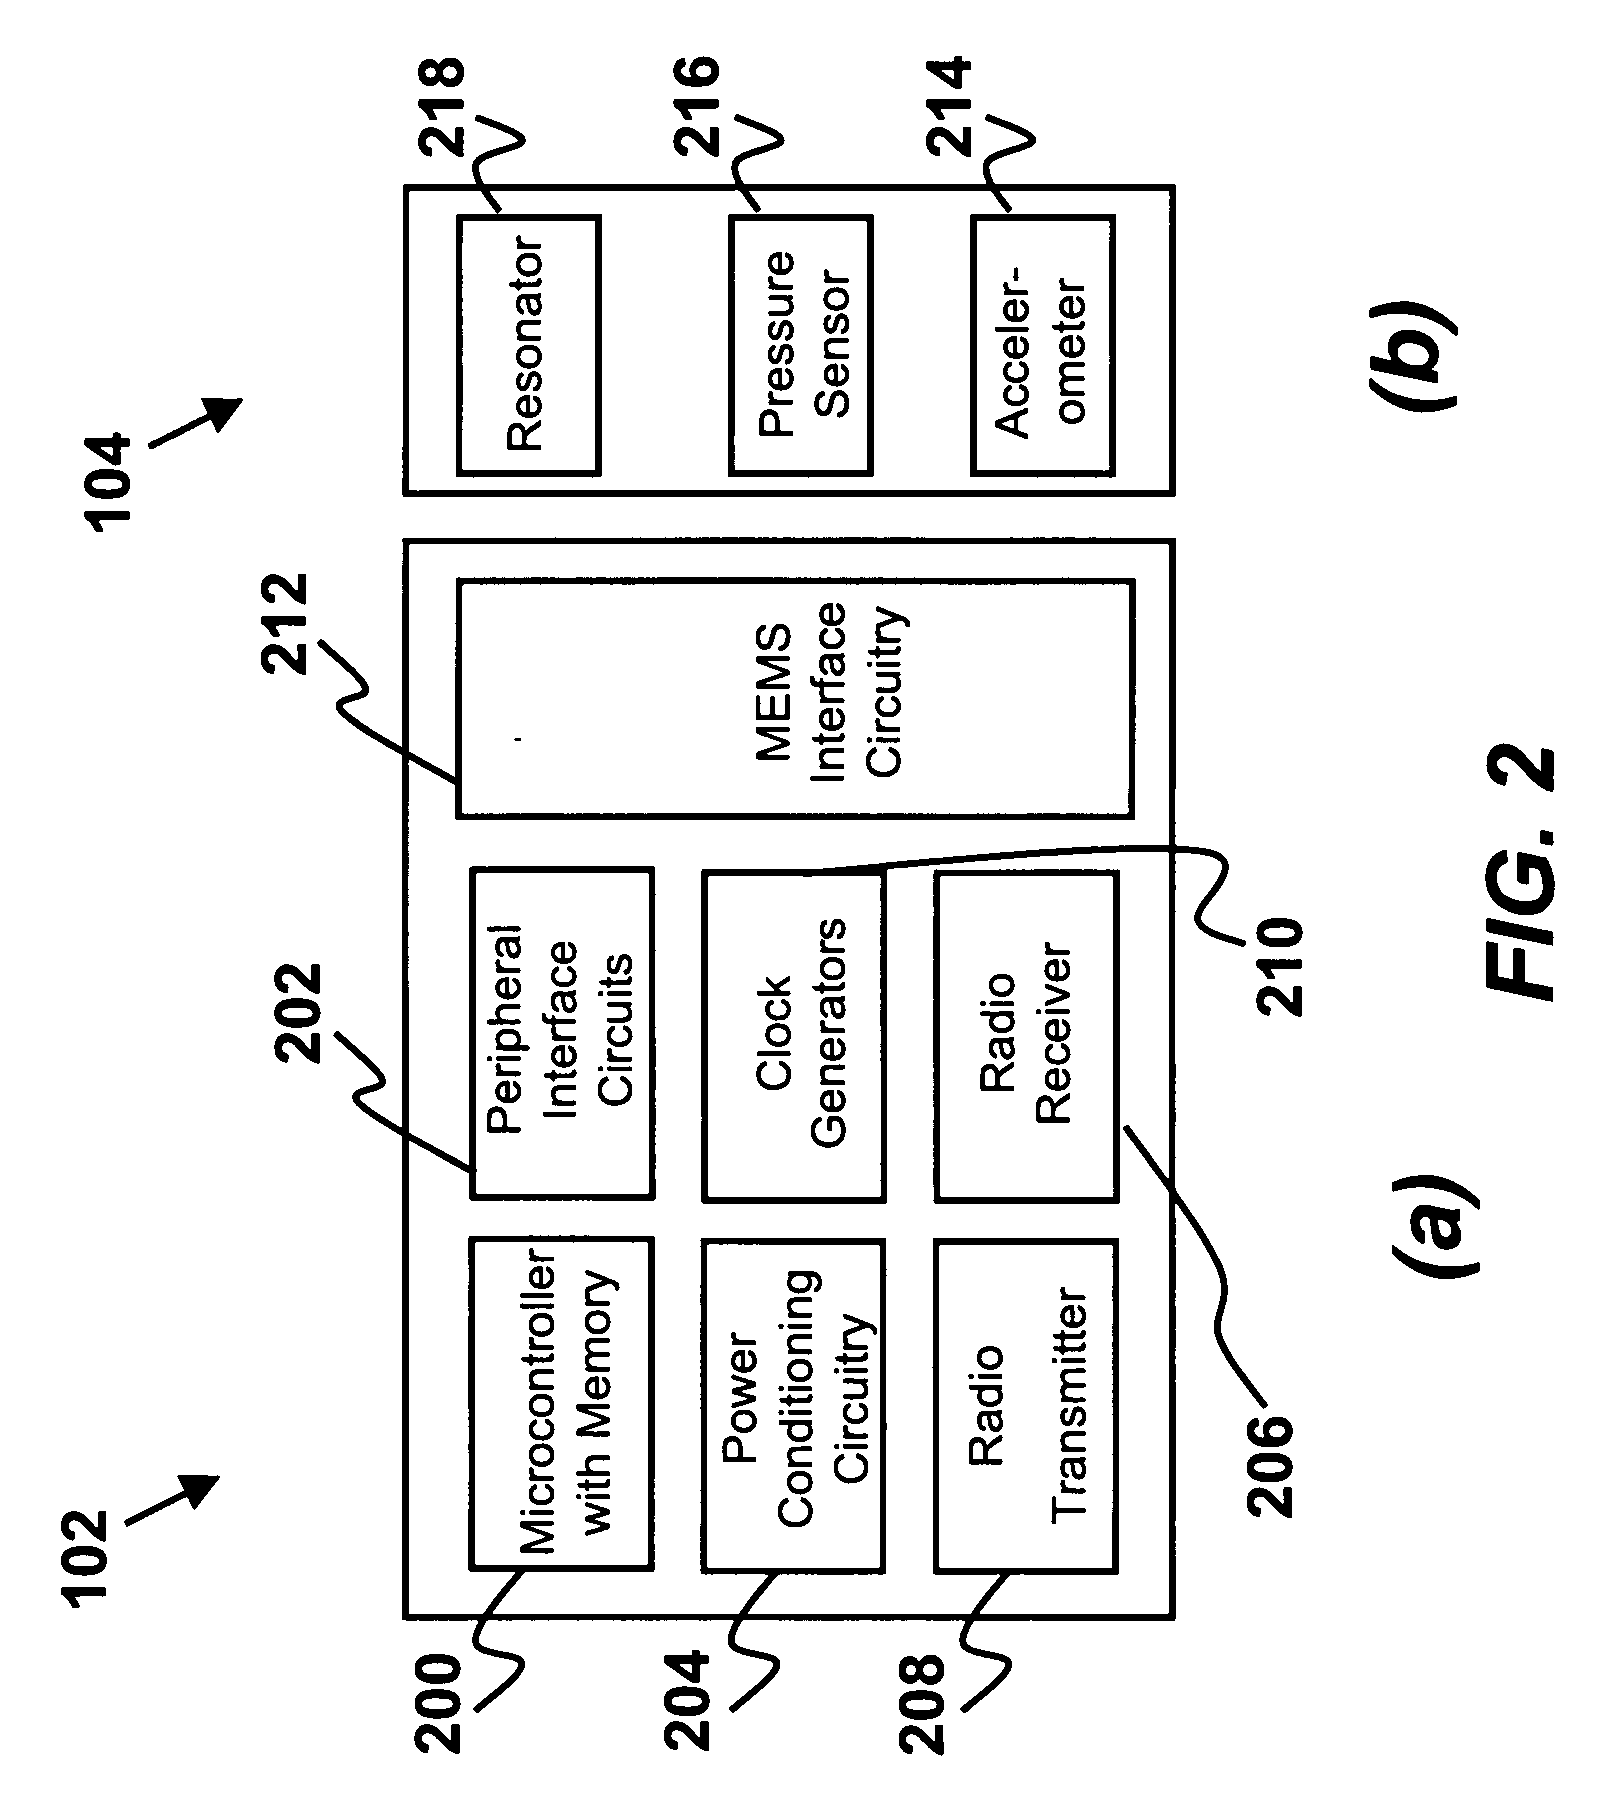 Signal conditioning methods and circuits for a capacitive sensing integrated tire pressure sensor